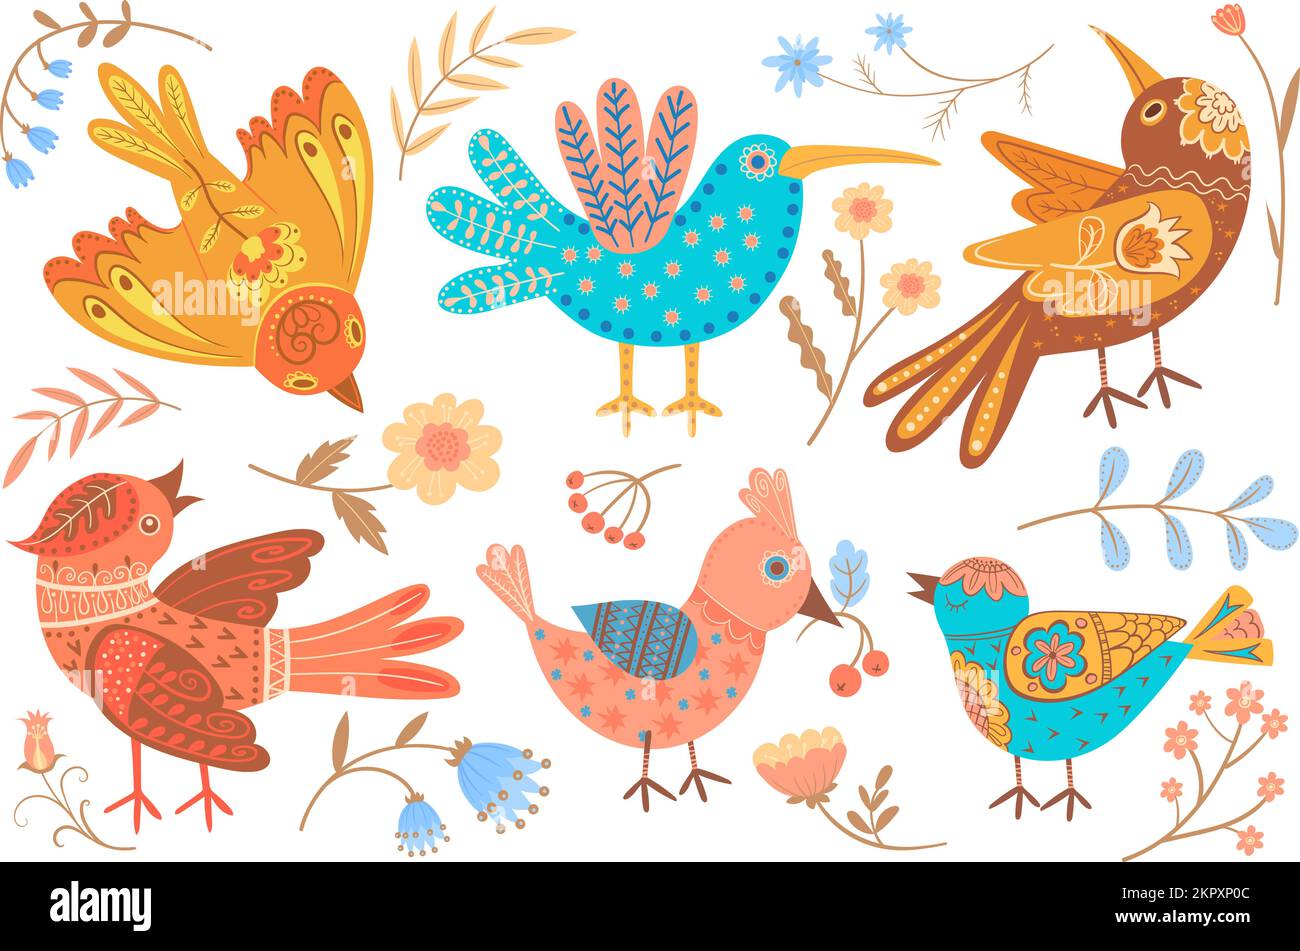 Ethnic folk birds. Decorative bird with flower wing stylized in scandinavian culture, slovak embroidery patch leaves elements nordic ornamental animals set neat vector illustration of ethnic folk bird Stock Vector